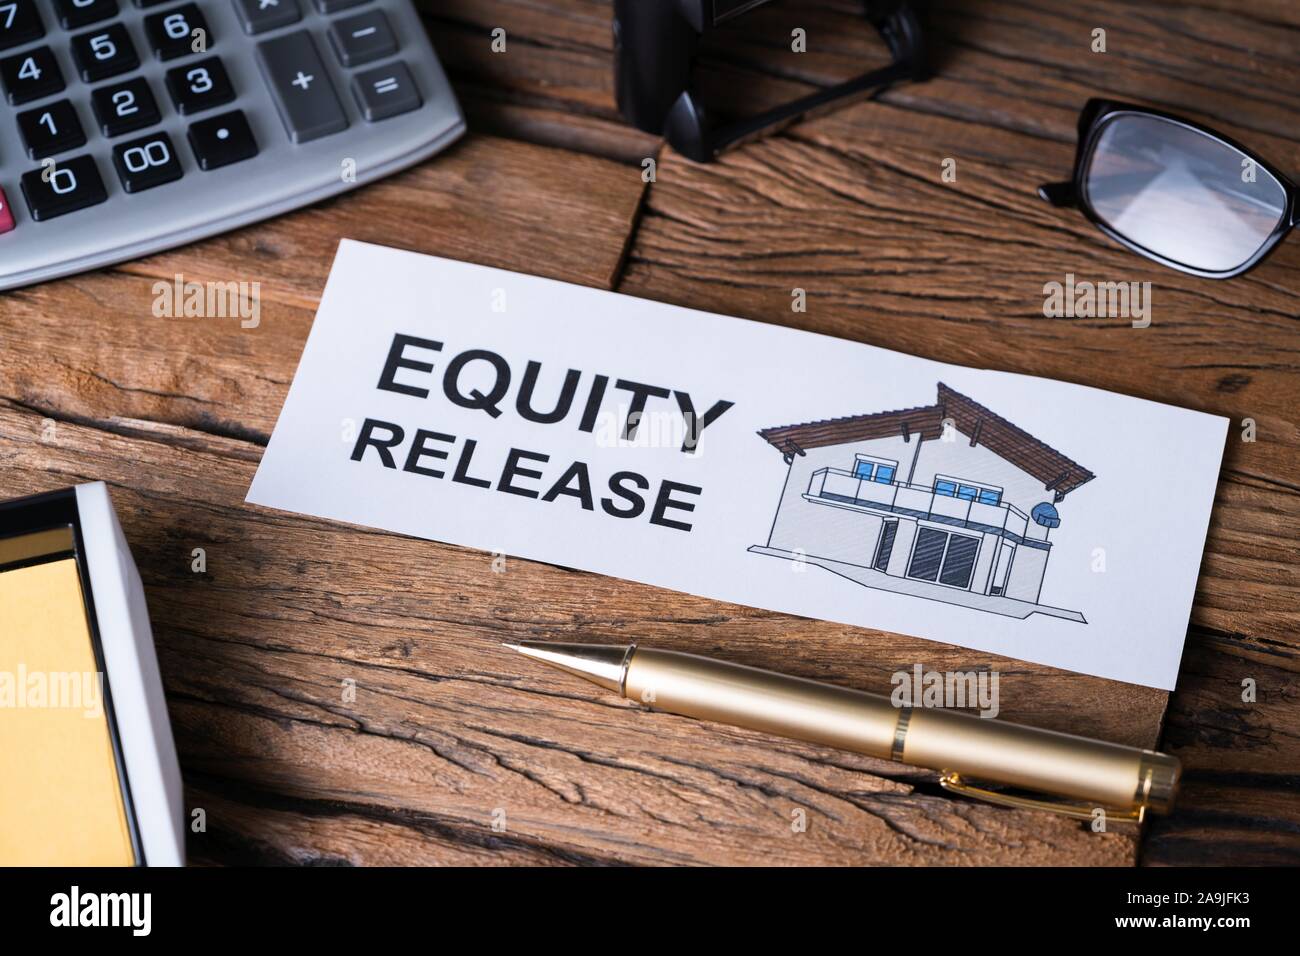 Overhead View Of Equity Release Text On Paper With A Colored House Near Office Supplies Stock Photo